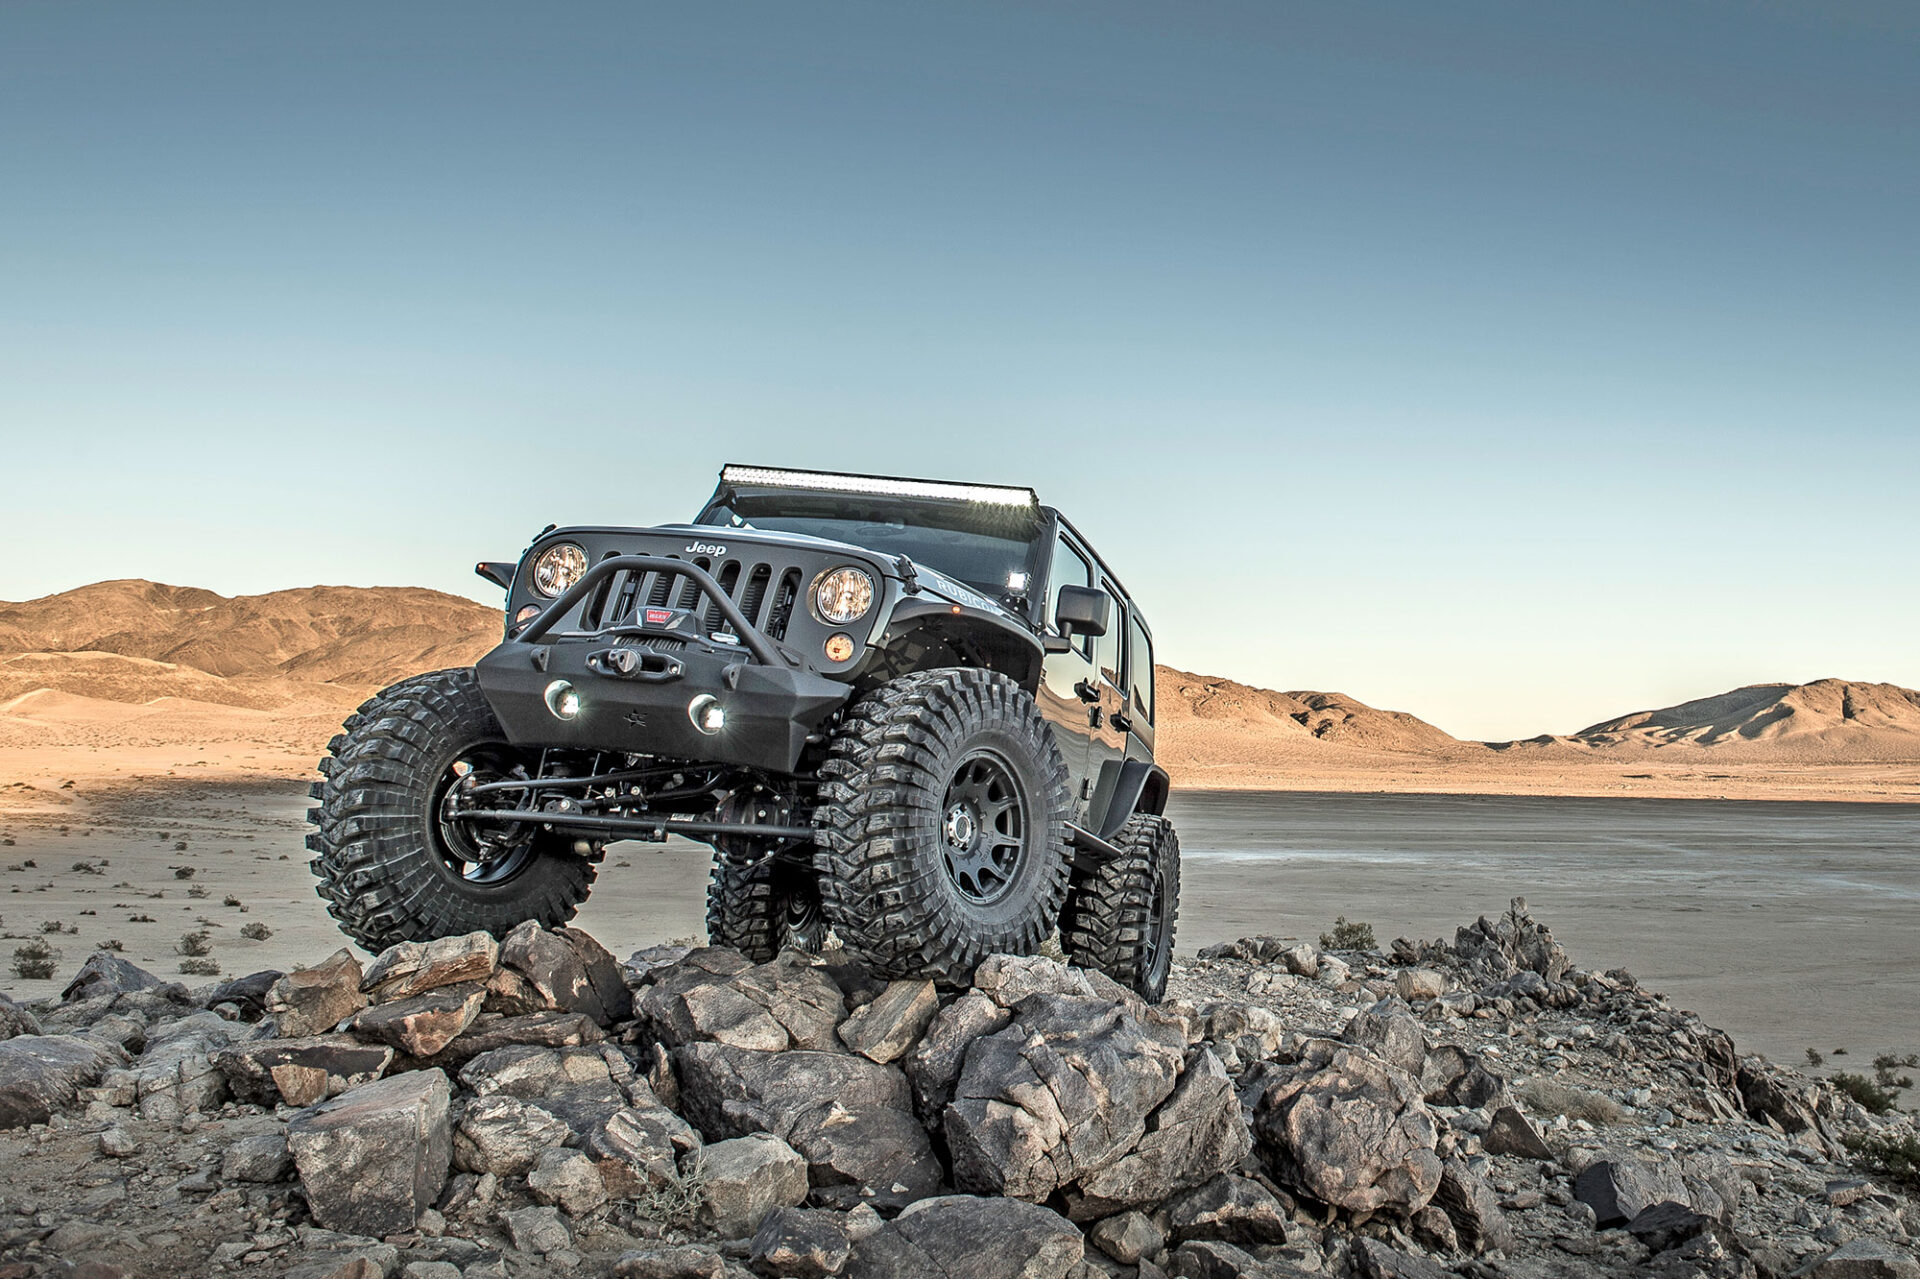 Vehicle outfitted with extreme-off-road Maxxis tires crossing desert rocks.